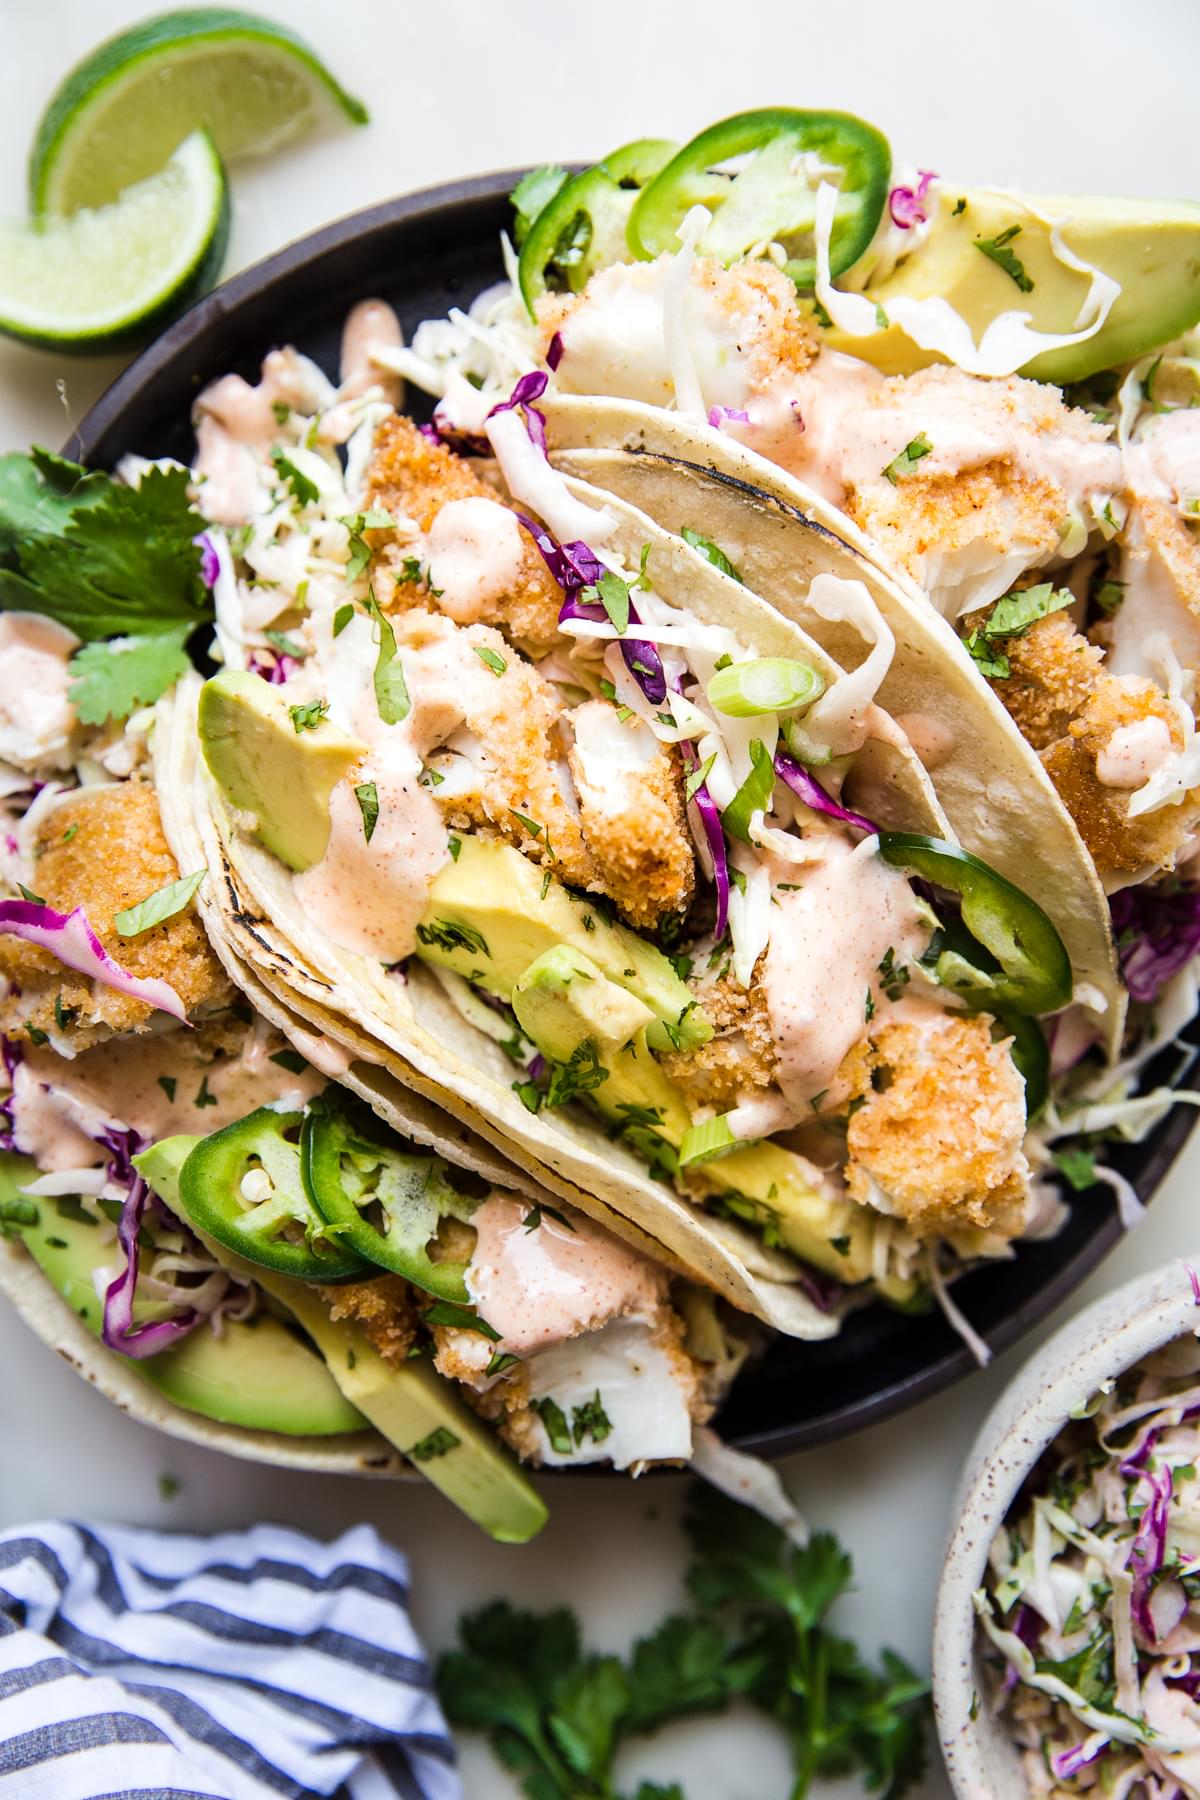 cajun crispy fish tacos with jalapeño and avocado in a plate